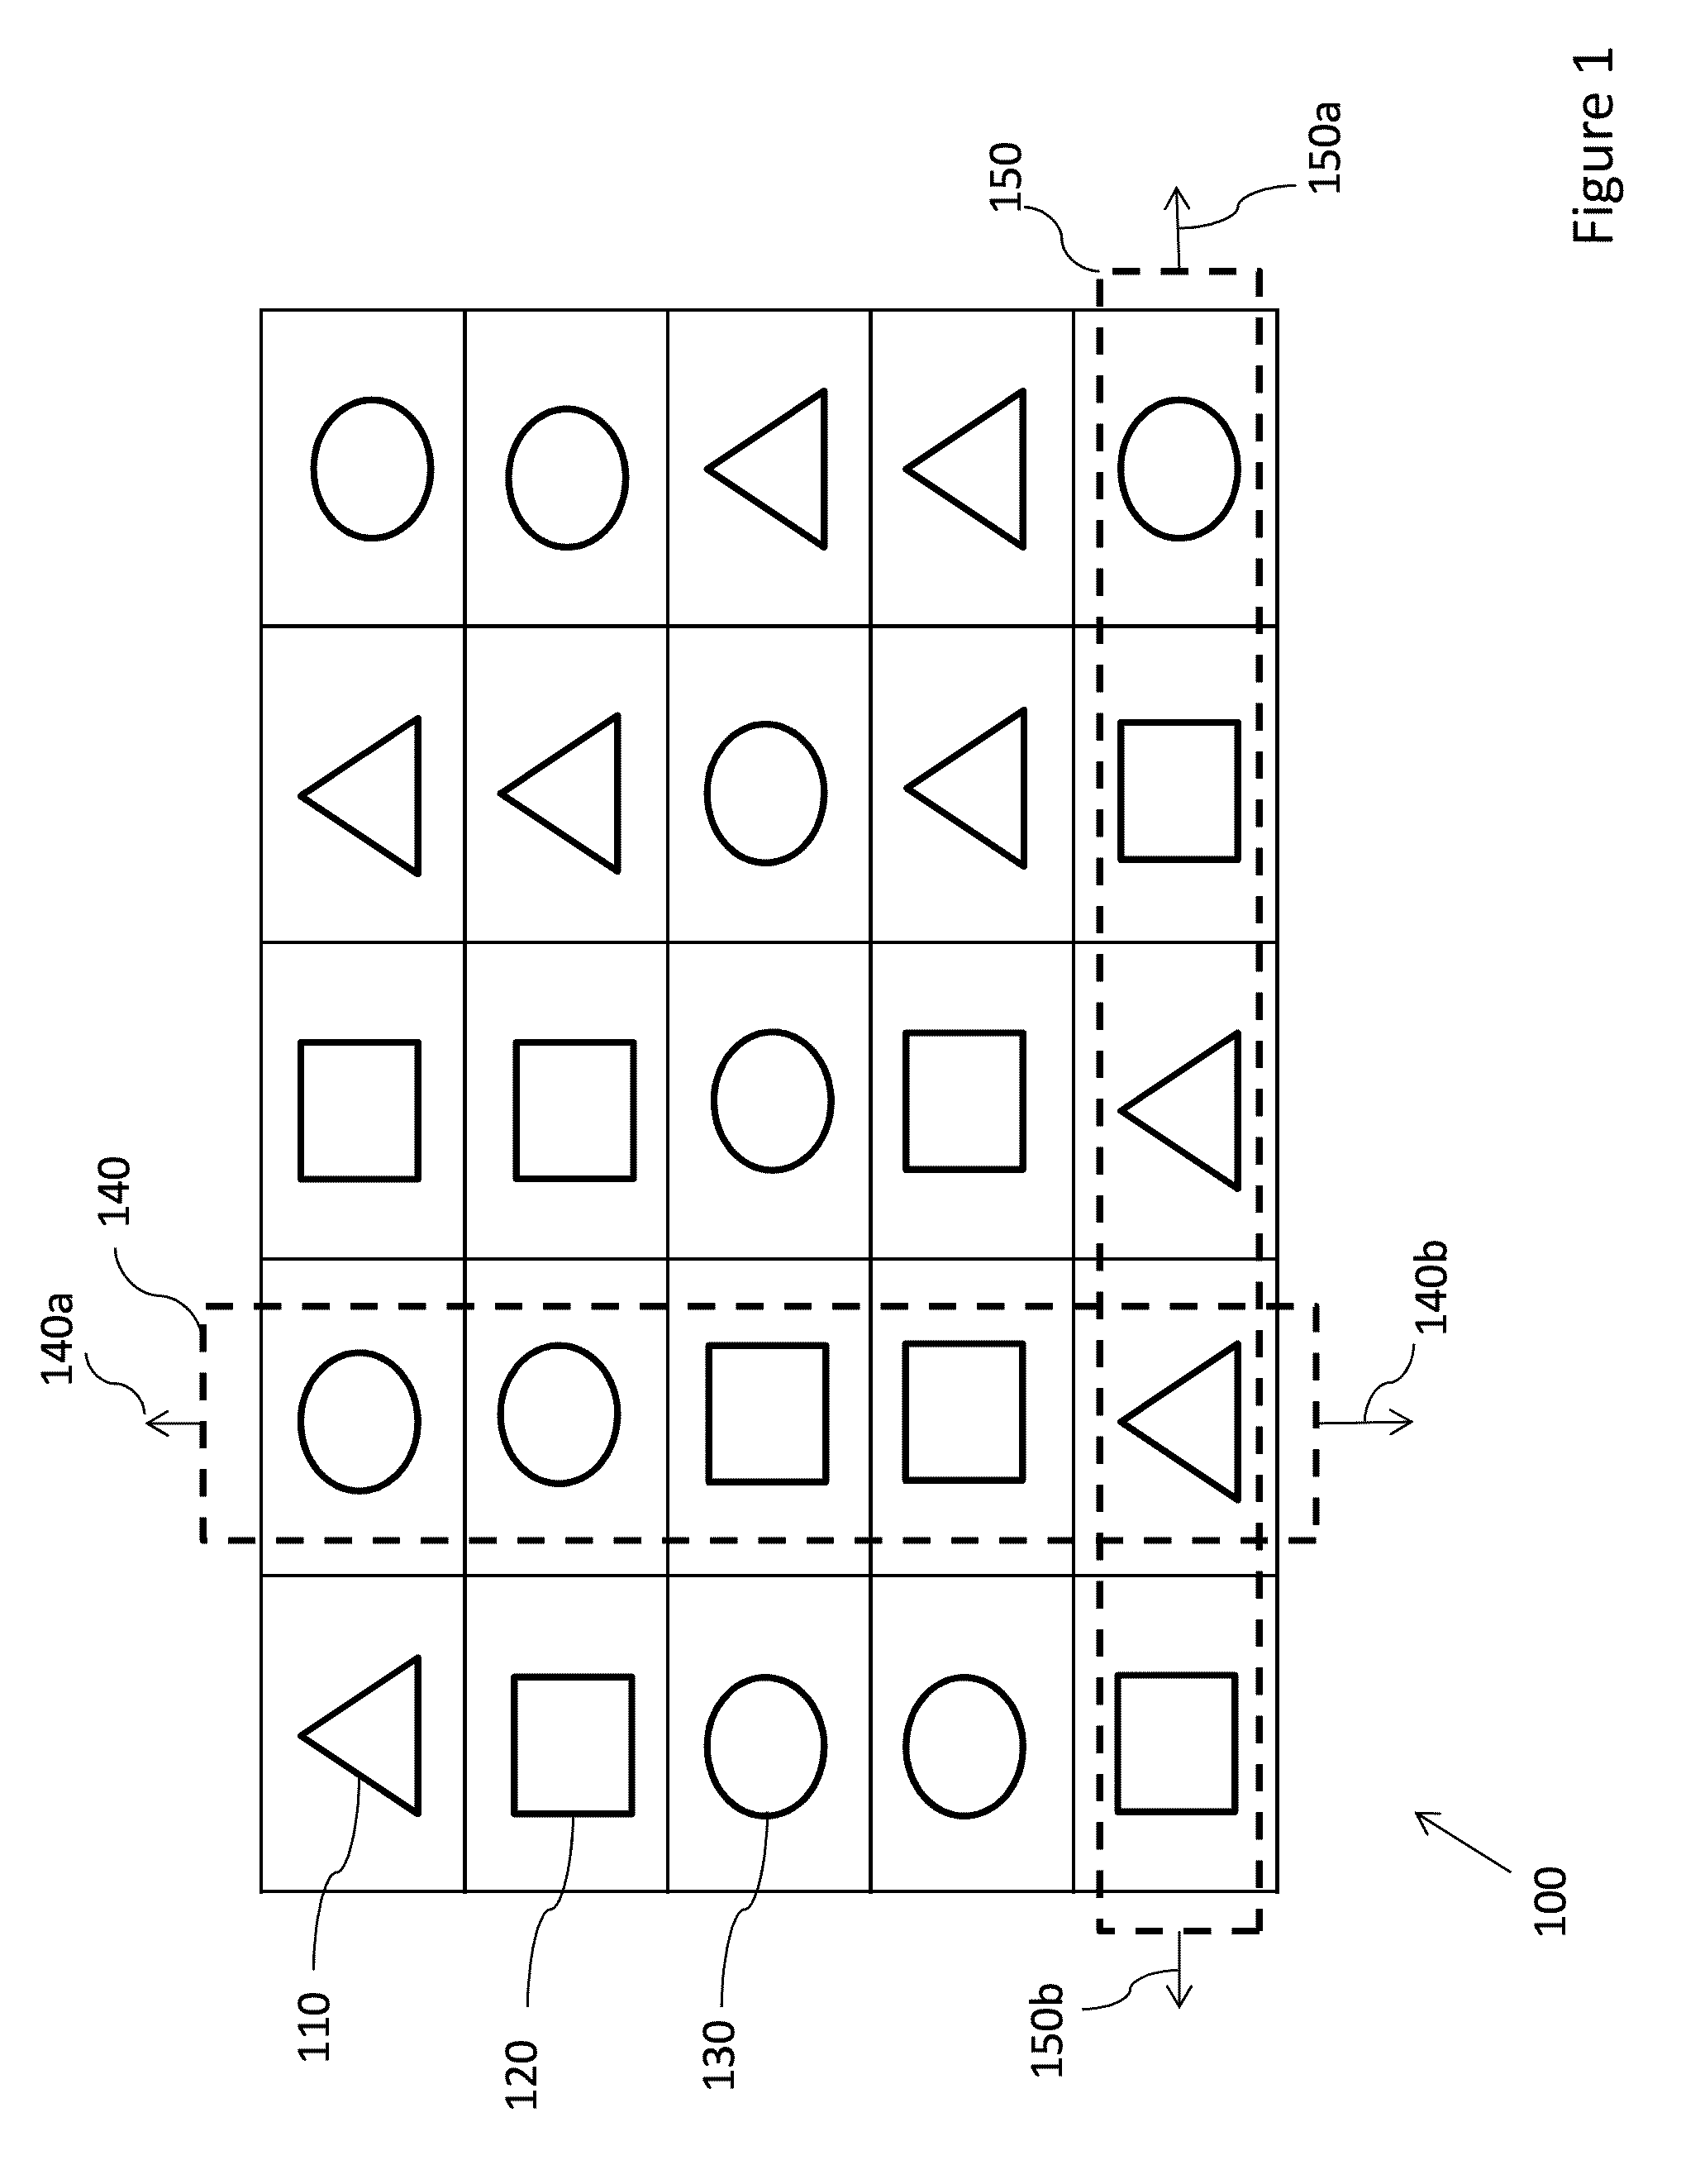 Apparatus and methods for computer implemented game